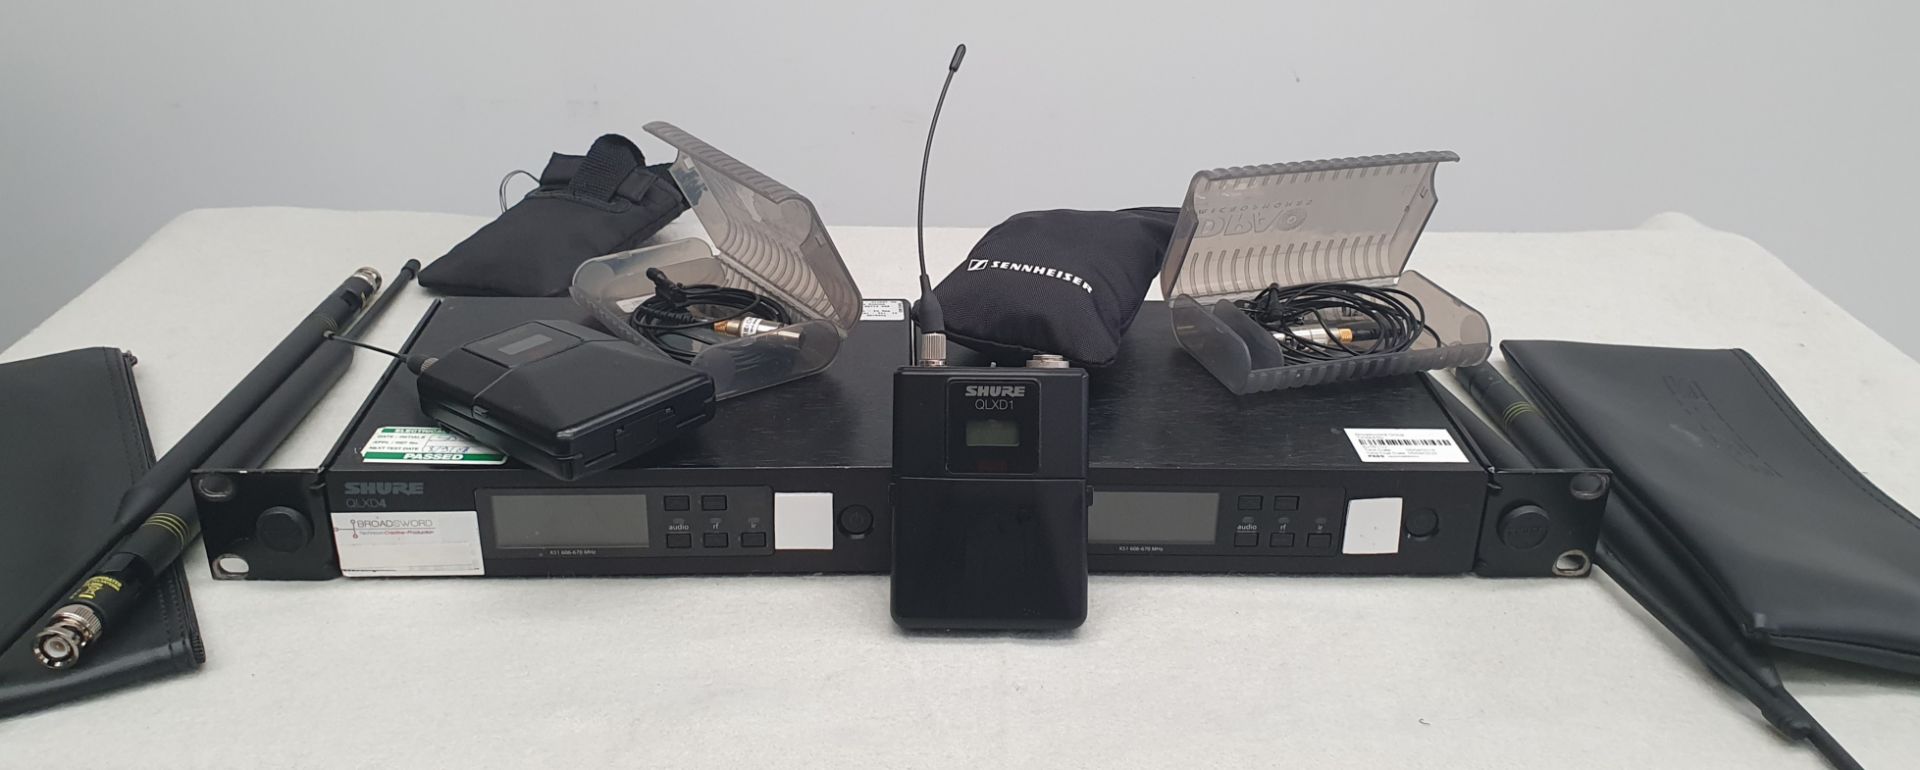 2 Shure QLXD4 Receivers, 2 Shure QLXD1 Bodypack Transmitters, 2 DPA 4060 Lapel Microphones and 2